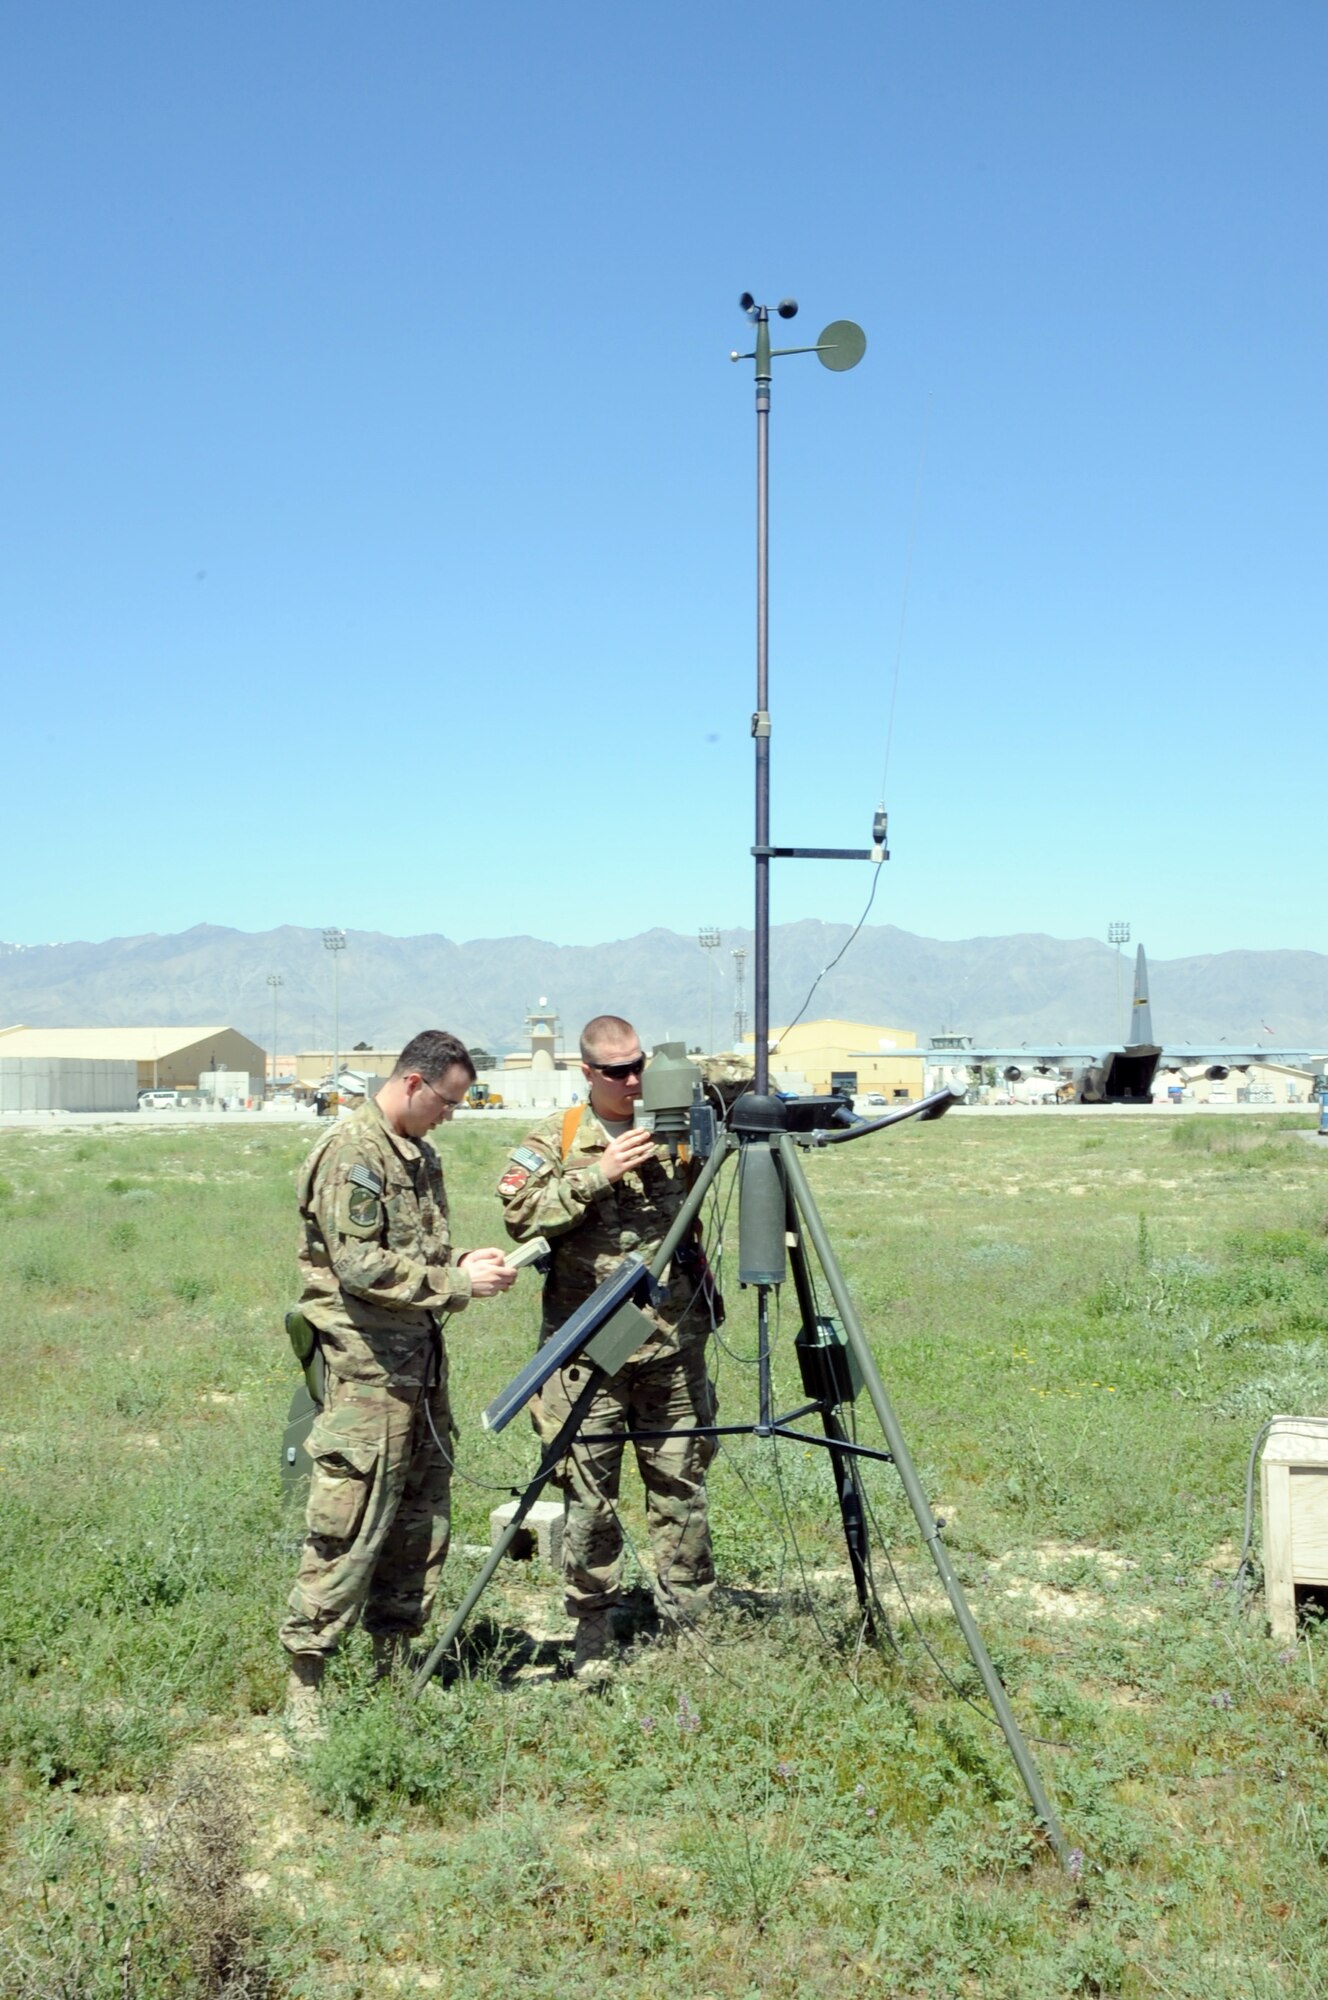 Senior Airman Jonathan Twyman, 455th Expeditionary Operations Support Squadron weather forecaster (left), and Capt. Thaddeus Fridgen, 455th EOSS weather flight commander, troubleshoot a tactical weather station on the flightline on Bagram Airfield, Afghanistan, May 1, 2013. Stations such as this one are set up in multiple locations to gather data on temperature, rainfall, etc., to aid in creating forecasts. (U.S. Air Force photo/Staff Sgt. David Dobrydney)